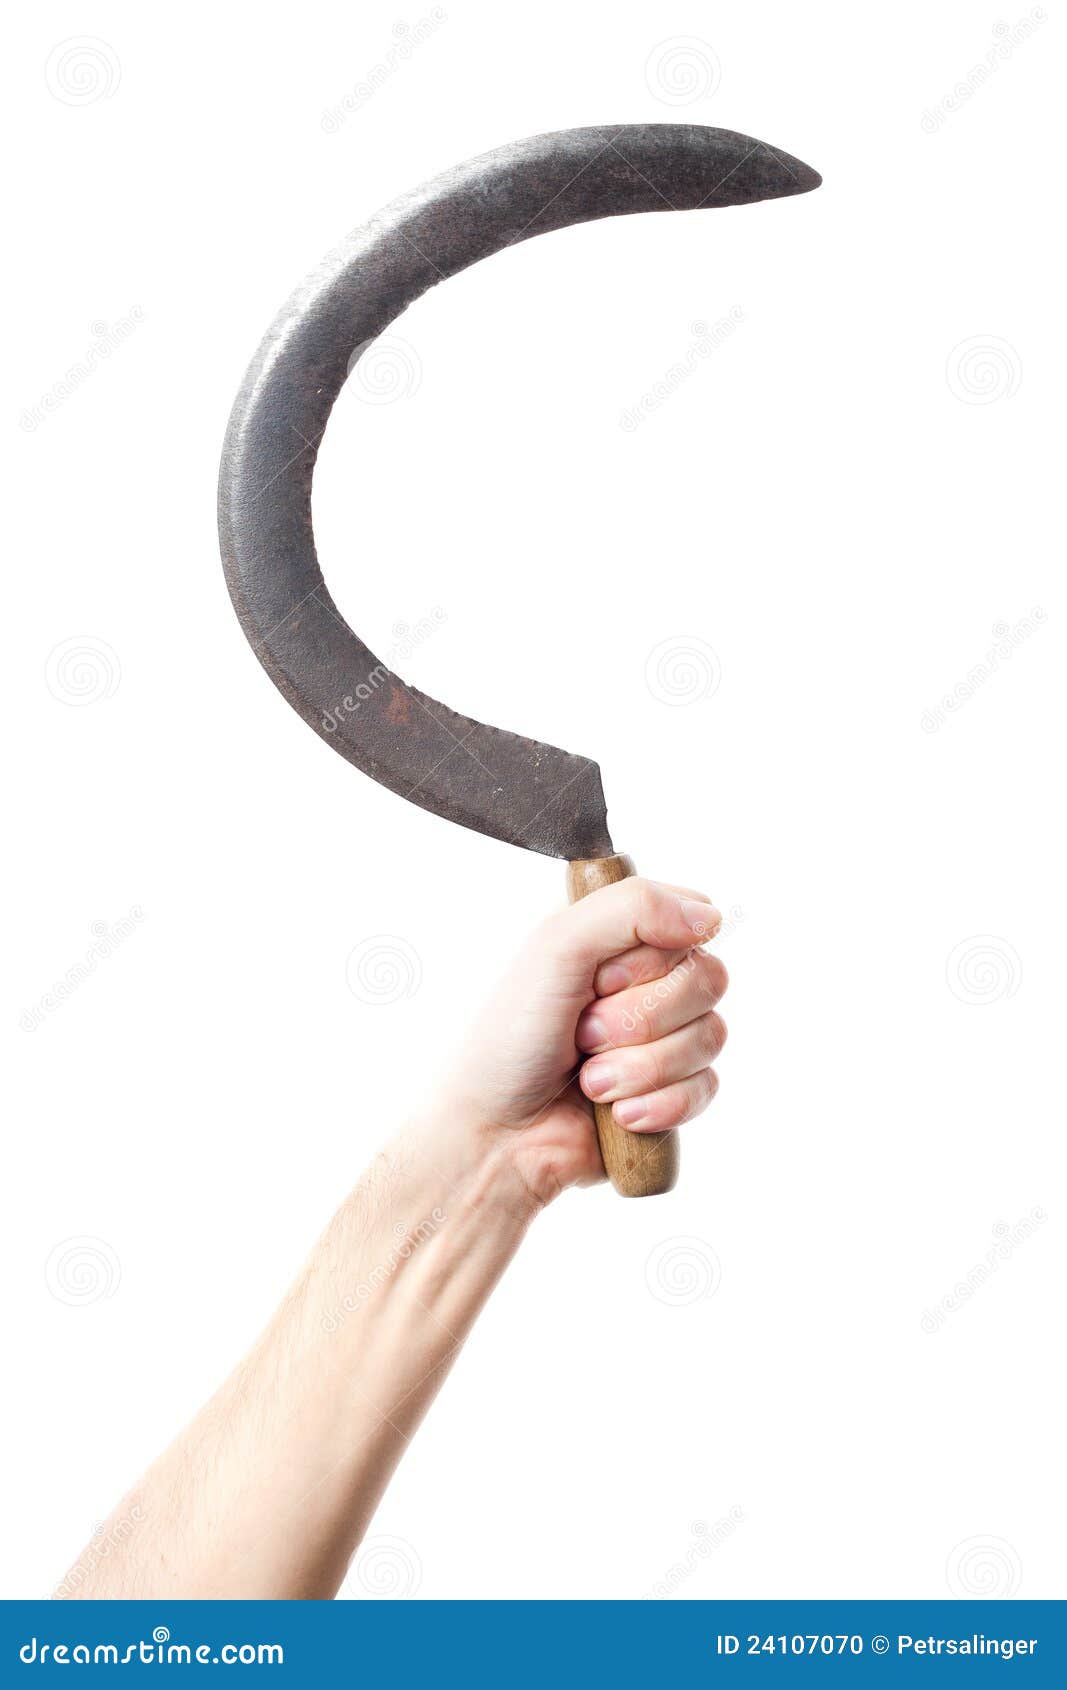 hand holding a sickle